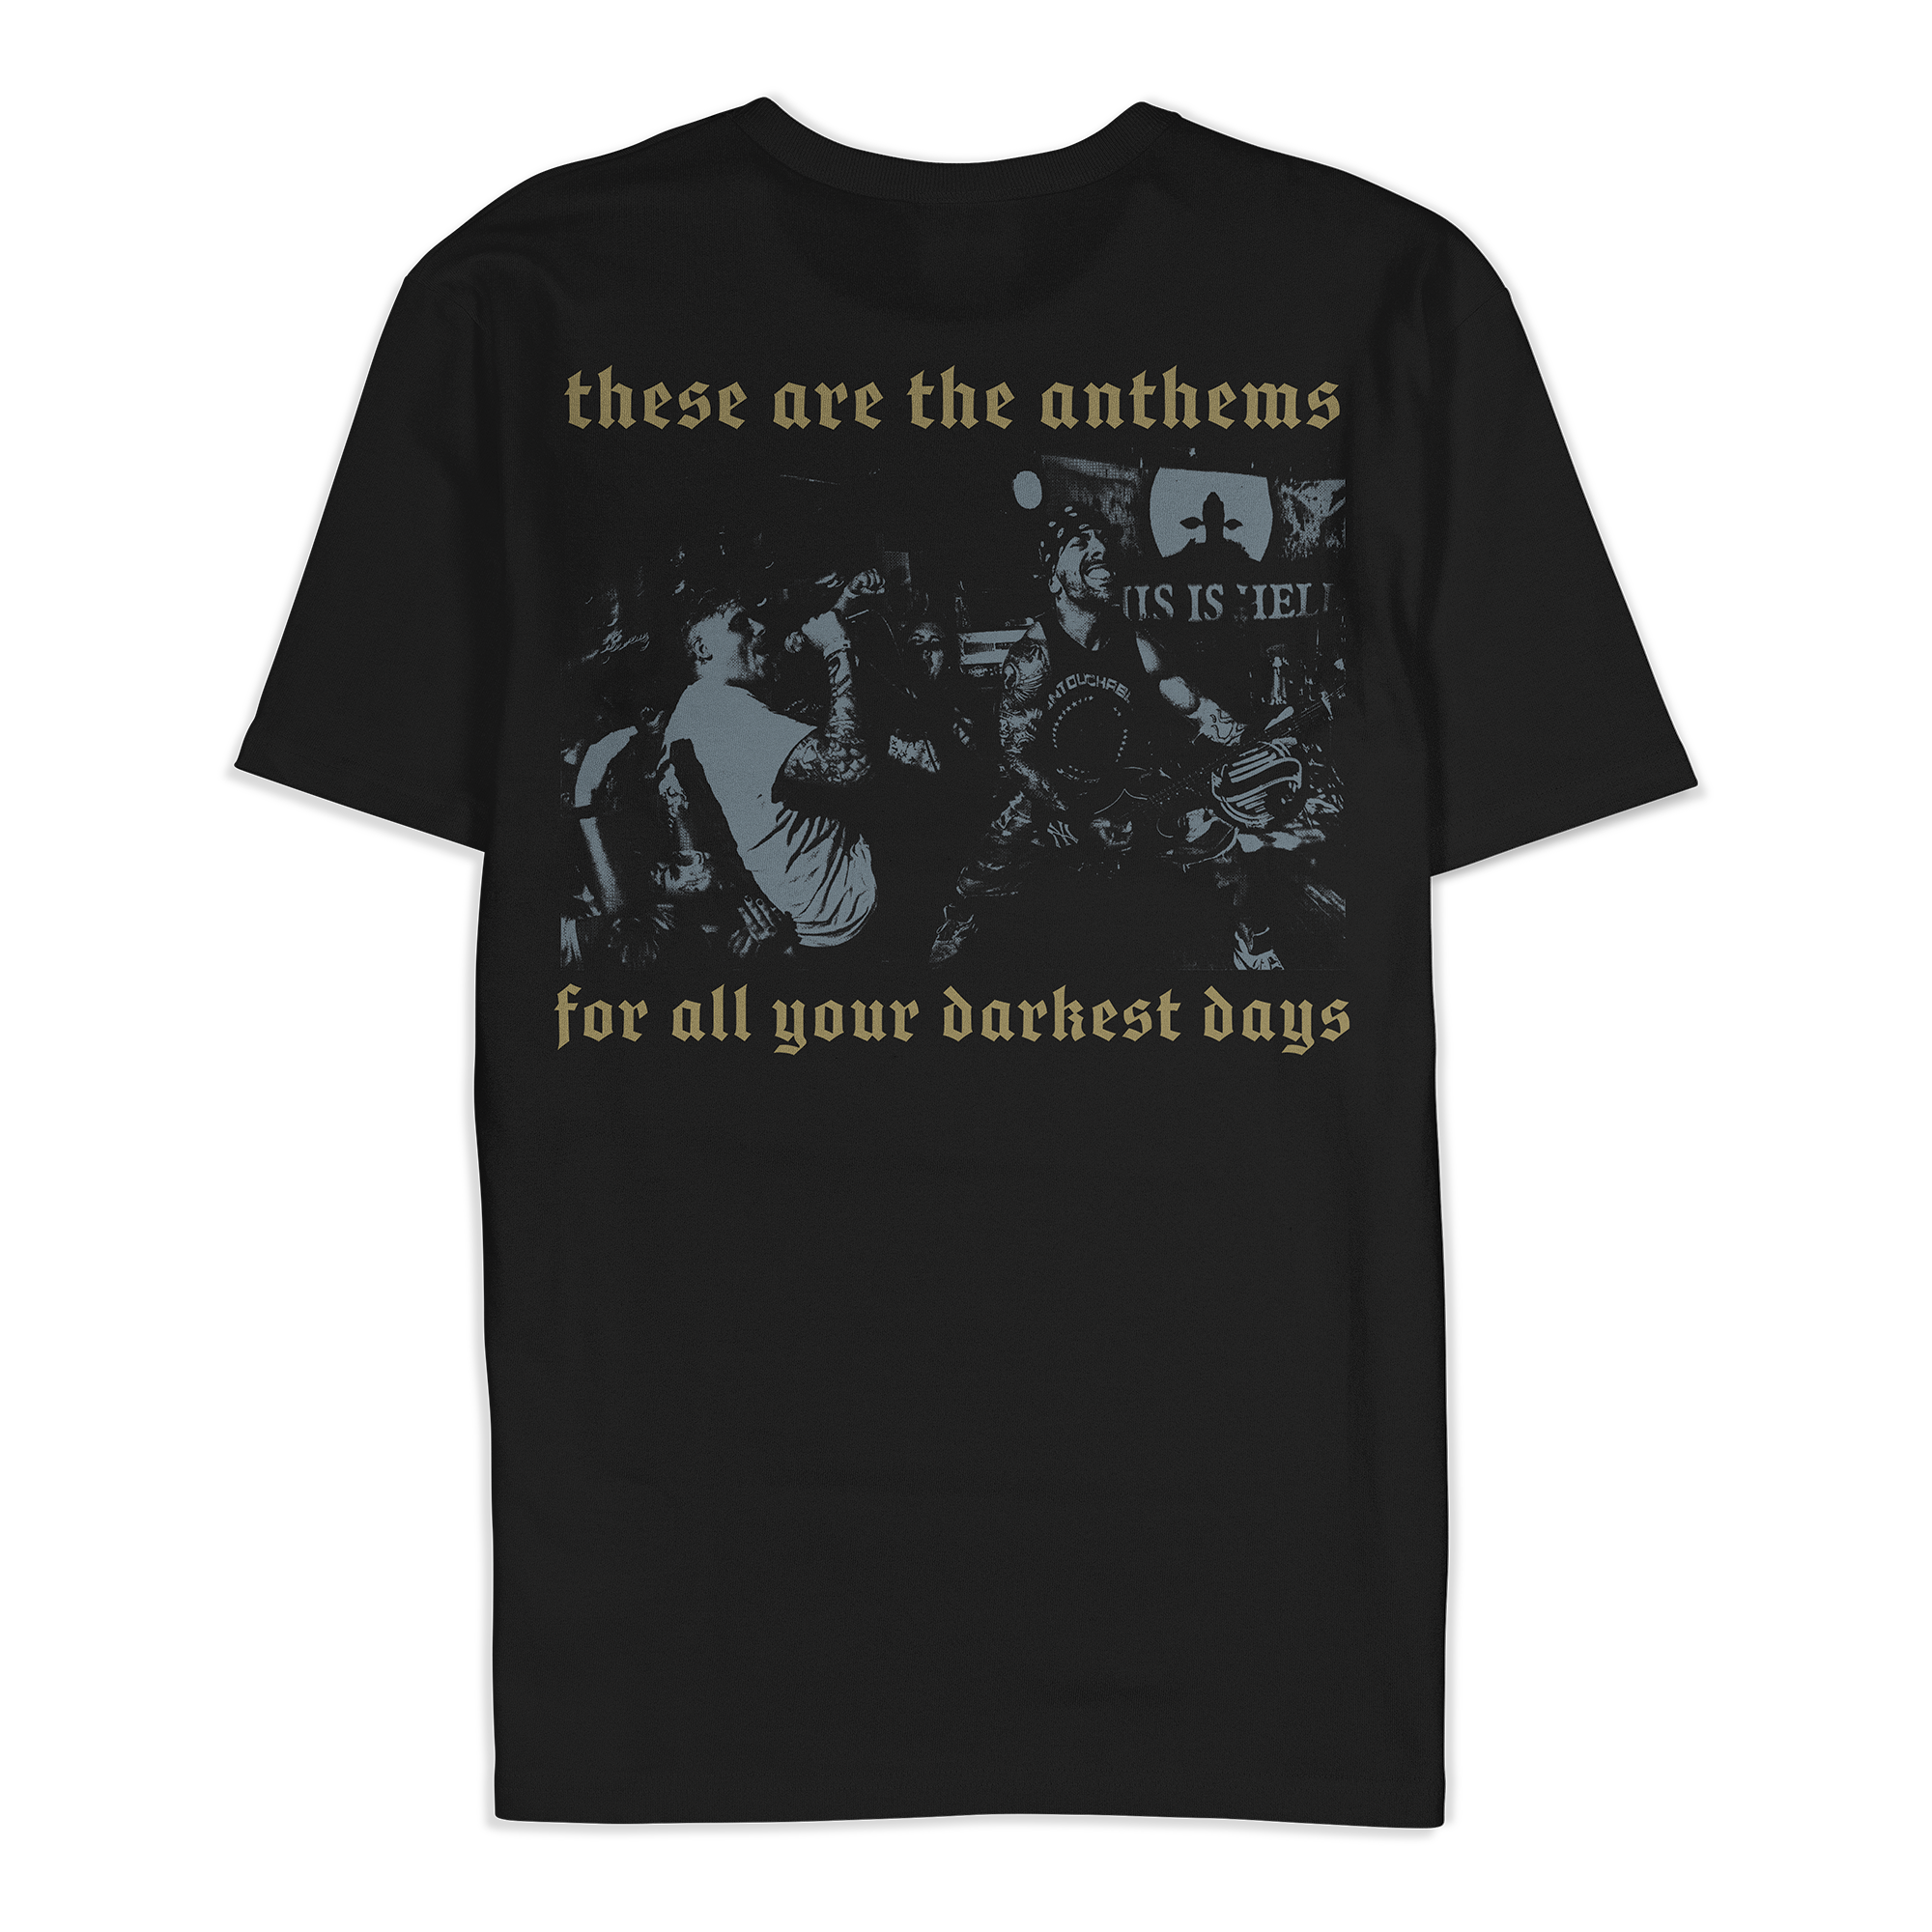 This Is Hell - Anthems Shirt